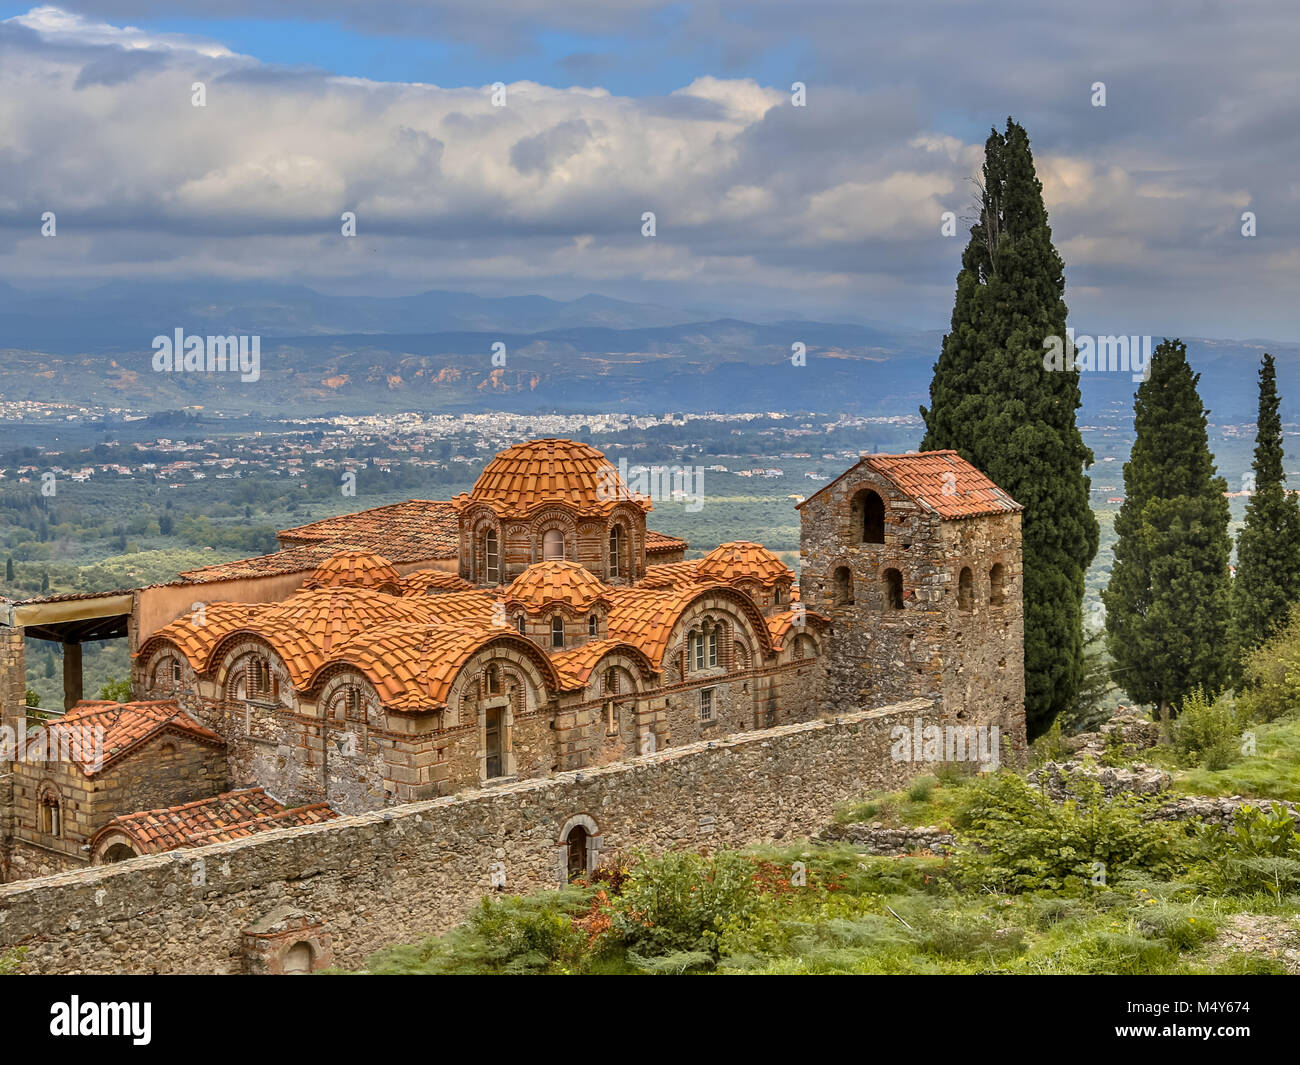 Monastery buildings in the medieval Byzantine ghost town-castle of Mystras, with city of Sparta in background Peloponnese, Greece Stock Photo